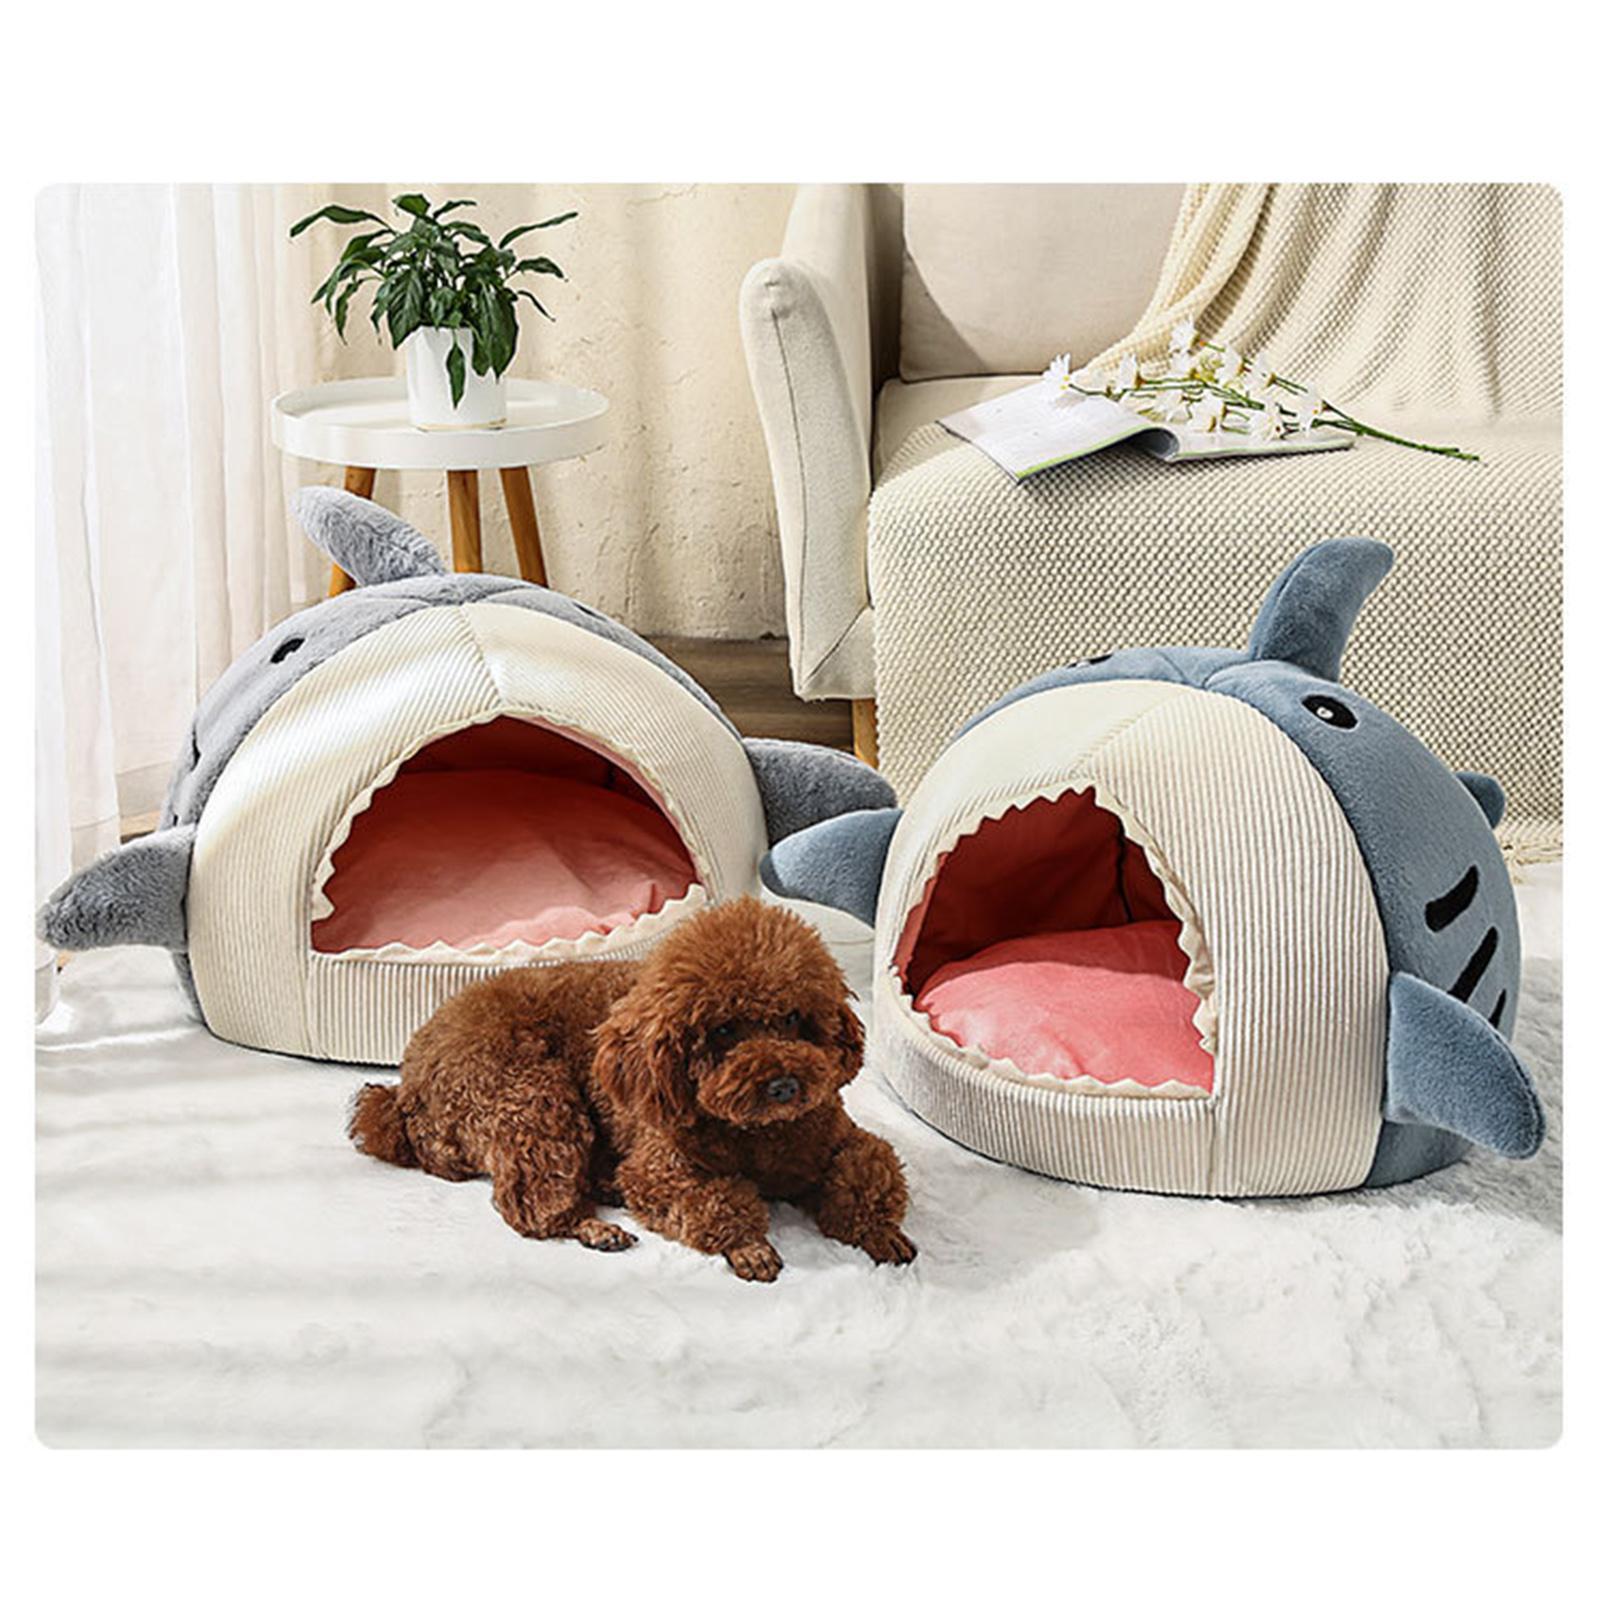 Cozy Pet Bed Warm Cave Nest Sleeping Bed Shark Shape Puppy House for Cats and Small Dogs